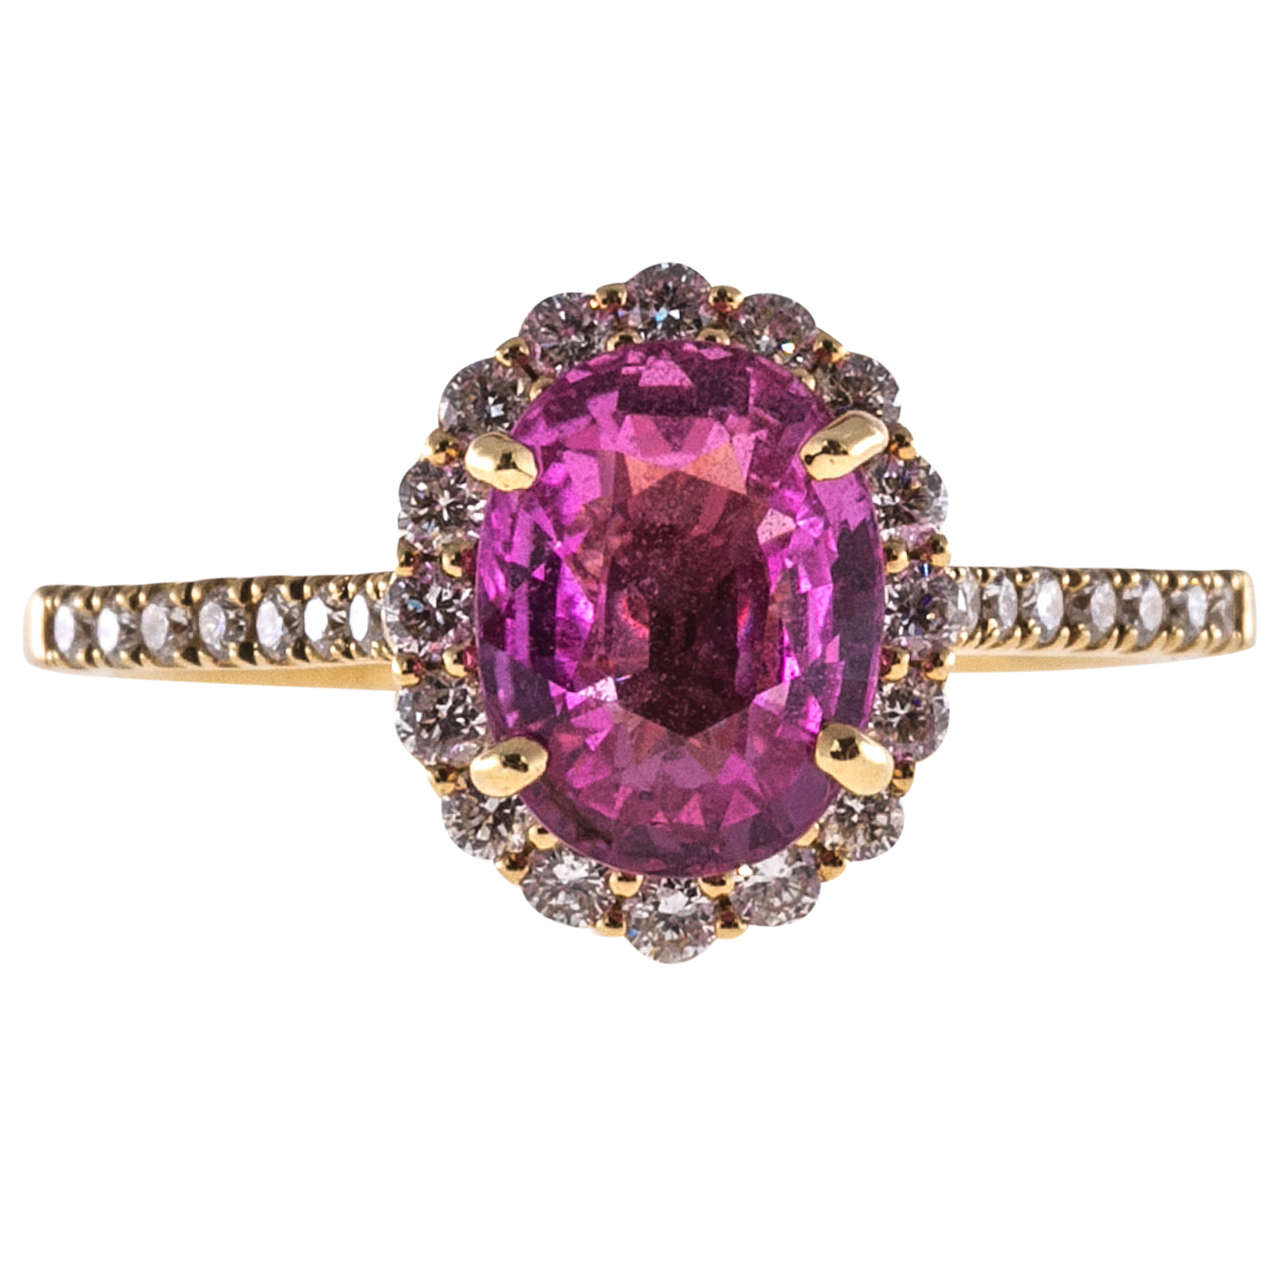 Bright pink oval Sapphire simple heat only in a beautiful oval halo of diamonds in a an 18k yellow gold setting with white diamond accents. A wedding band will fit flush against the ring.

1 oval bright pink Sapphire, approx. total weight 2.41cts,